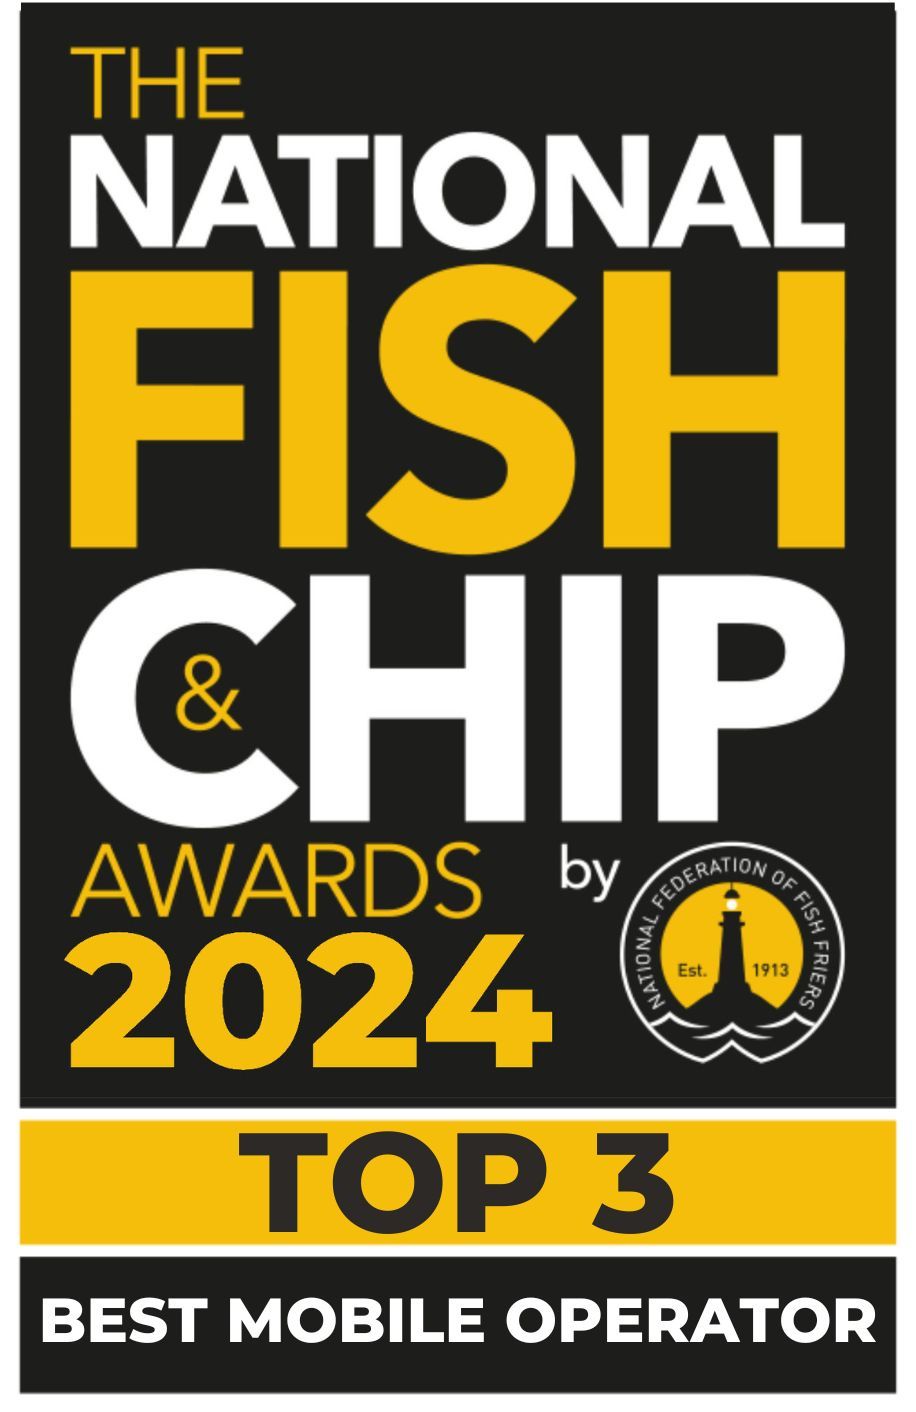 The Hungry Plaice Shortlisted As A Top 3 Mobile Operator In The National Fish & Chip Awards 2024